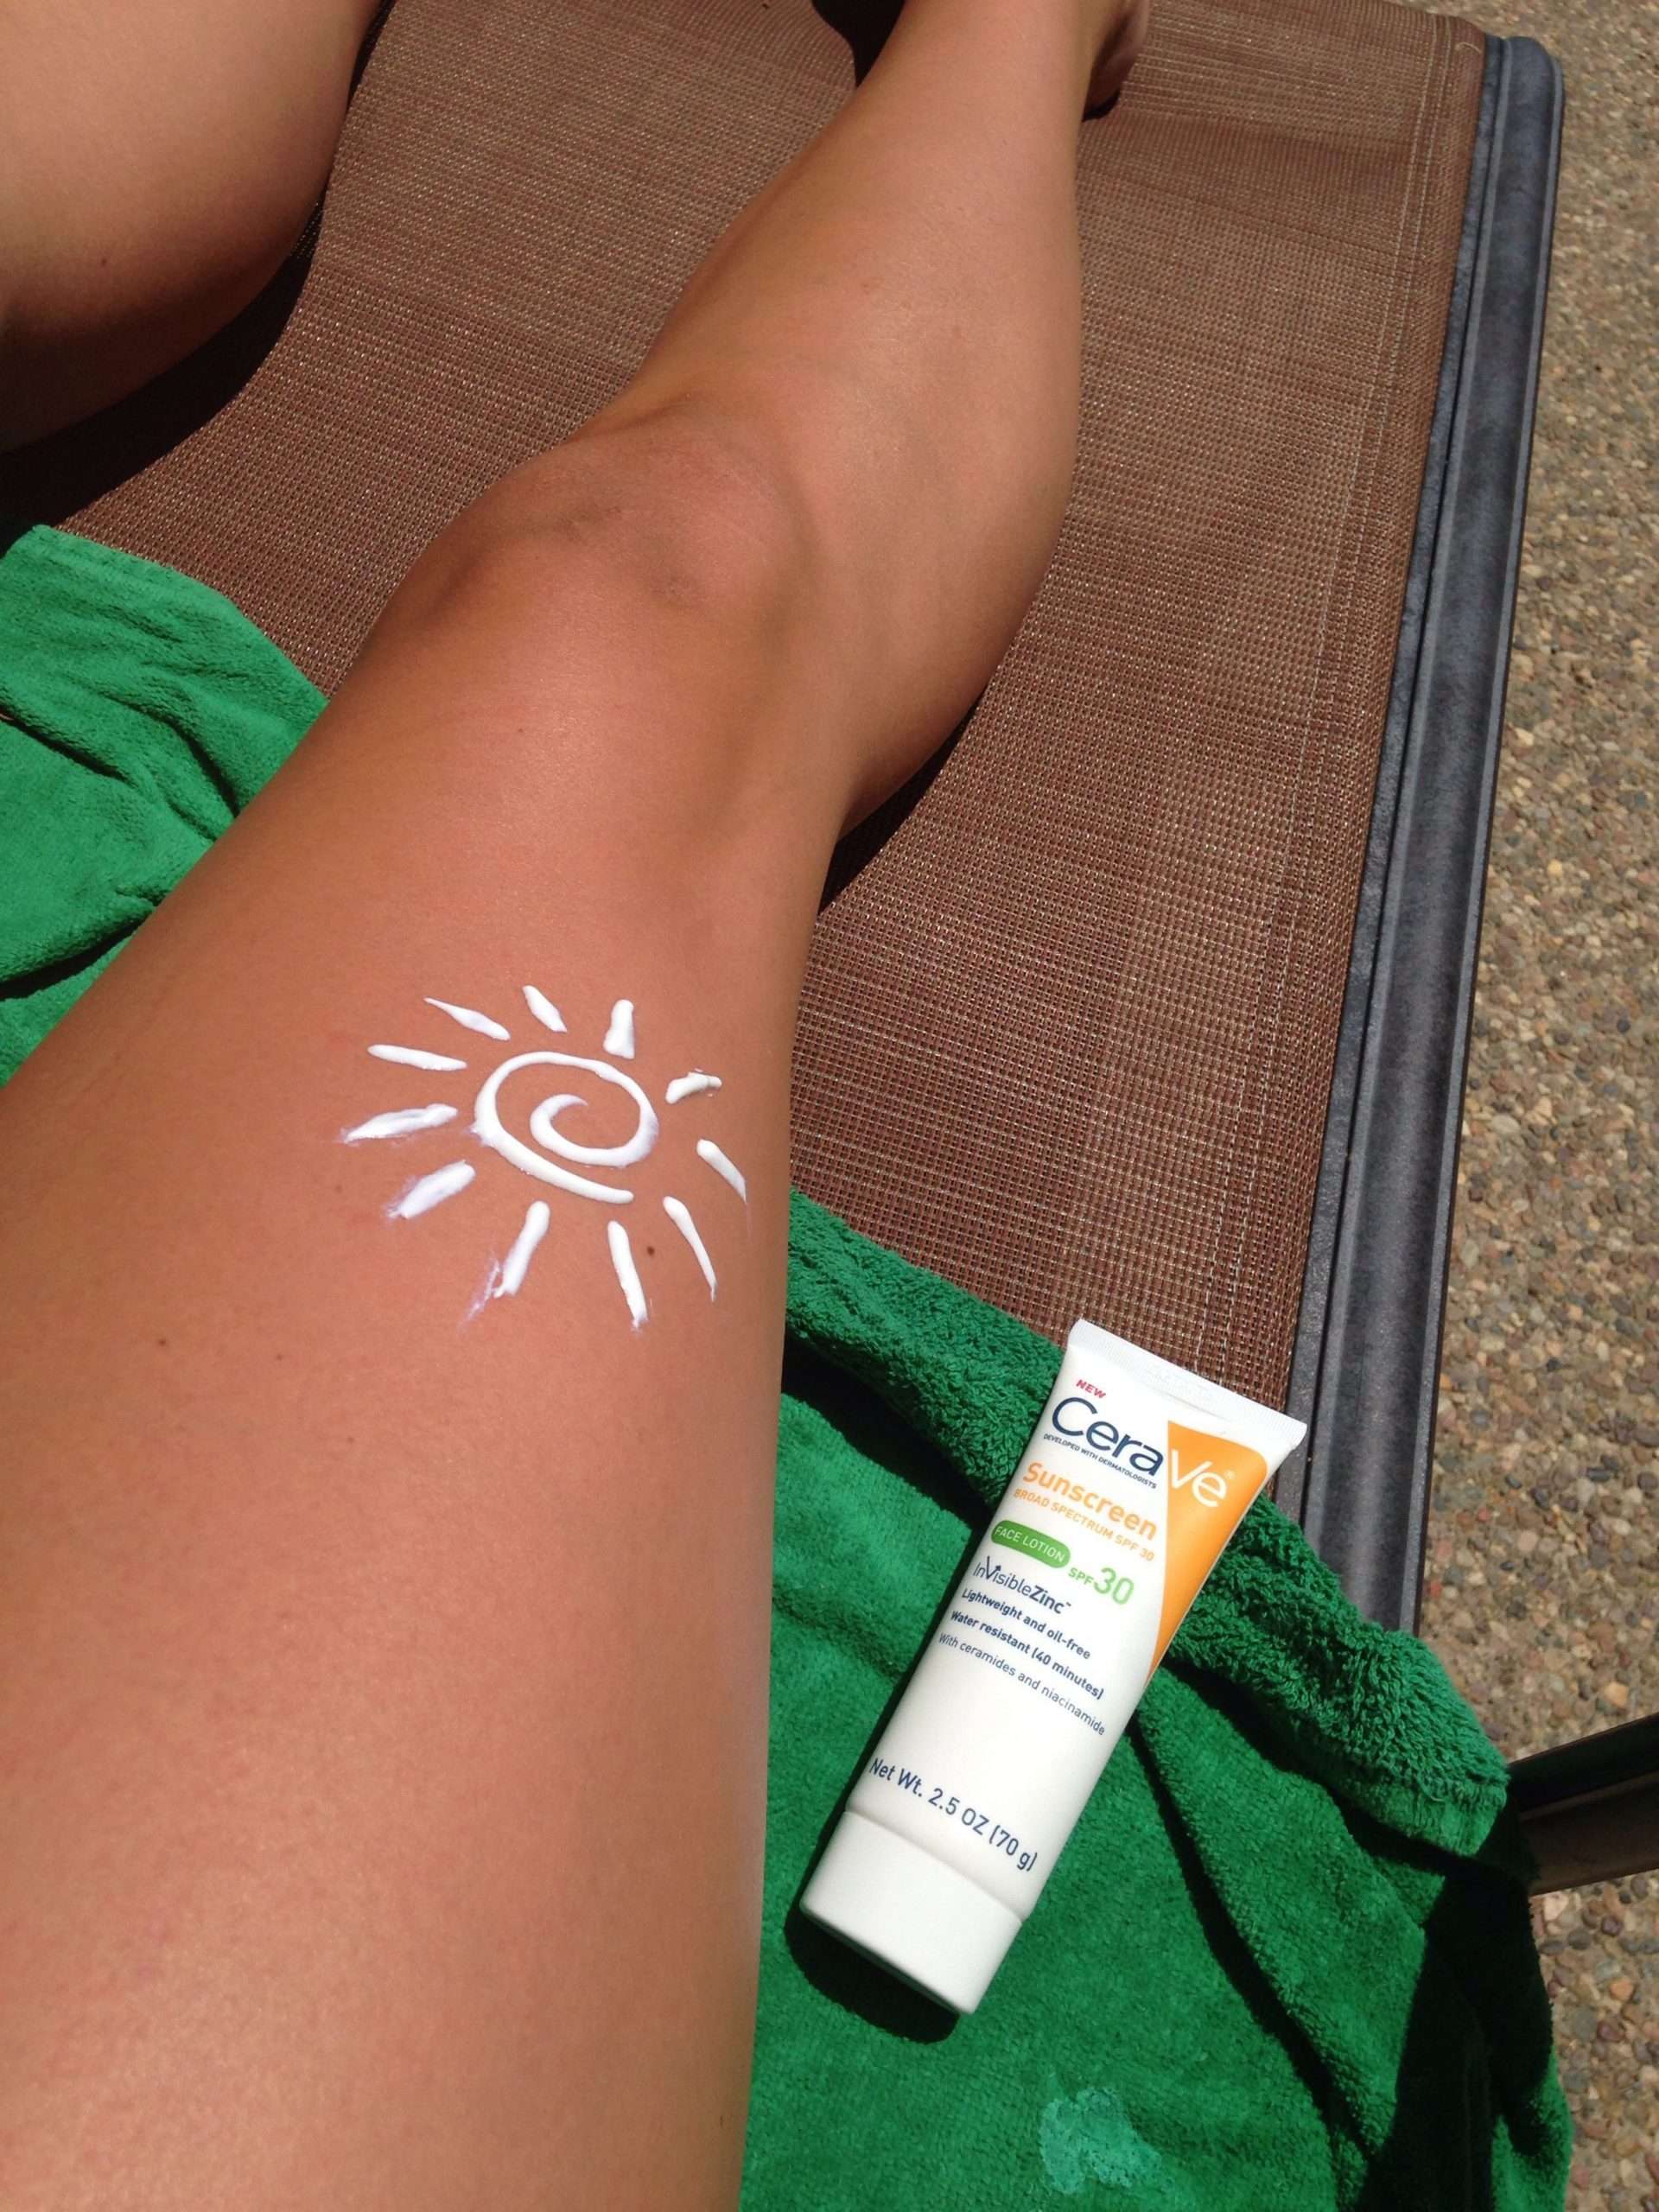 Just put sunscreen where you want your tattoo to be and It will be ...